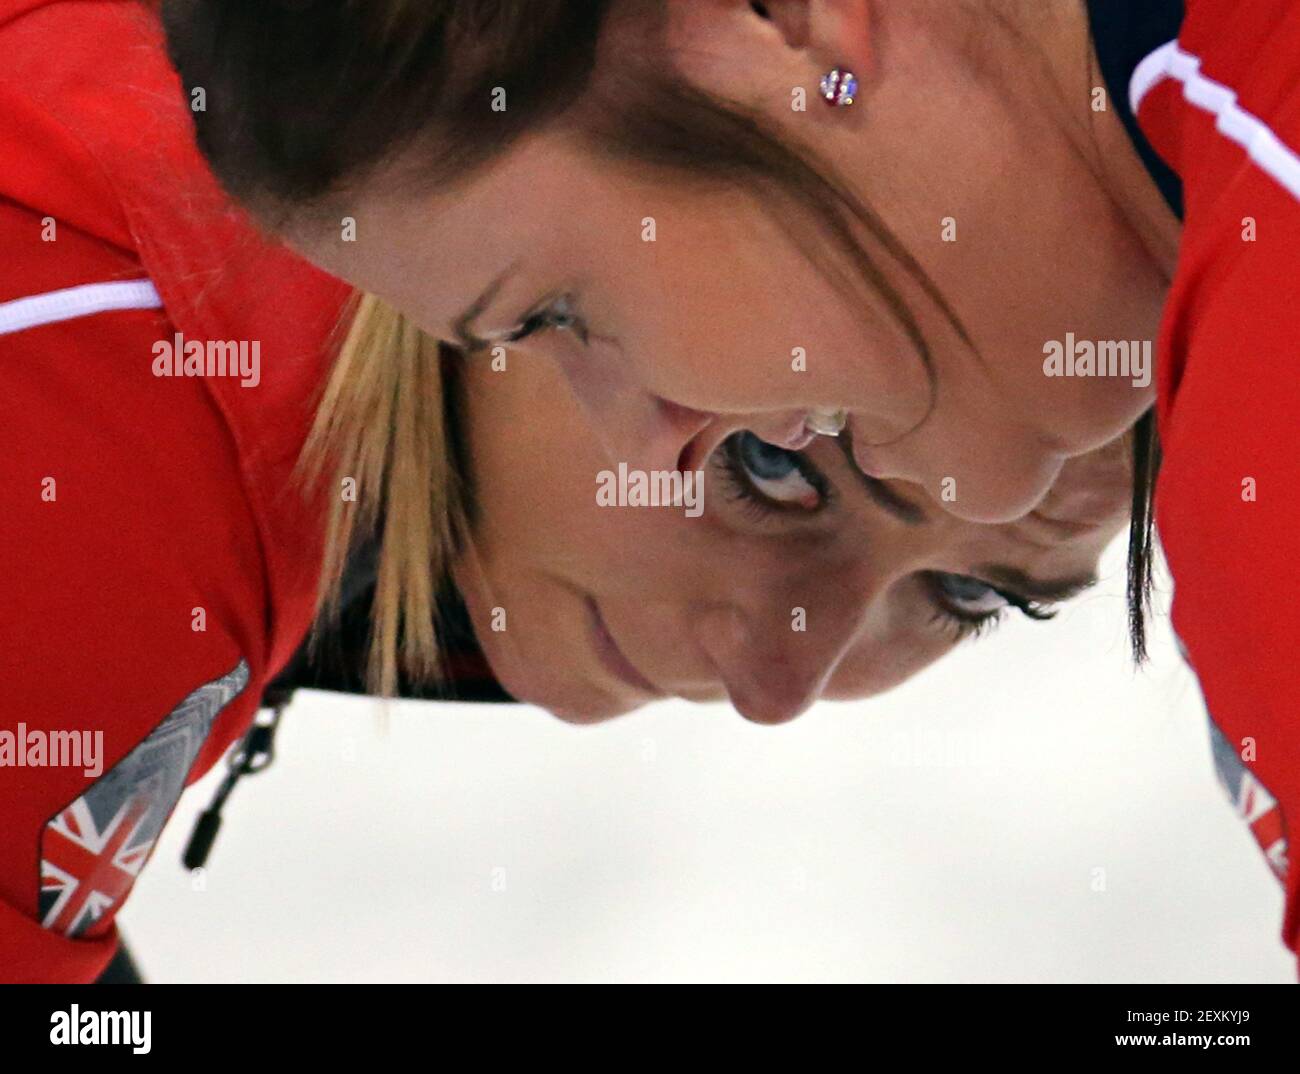 Great Britain's Anna Sloan (below) and Vicki Adams play during women's curling semifinals at the Ice Cube Curling Center during the Winter Olympics in Sochi, Russia, Wednesday, Feb. 19, 2014. (Photo by Brian Cassella/Chicago Tribune/MCT/Sipa USA) Stock Photo